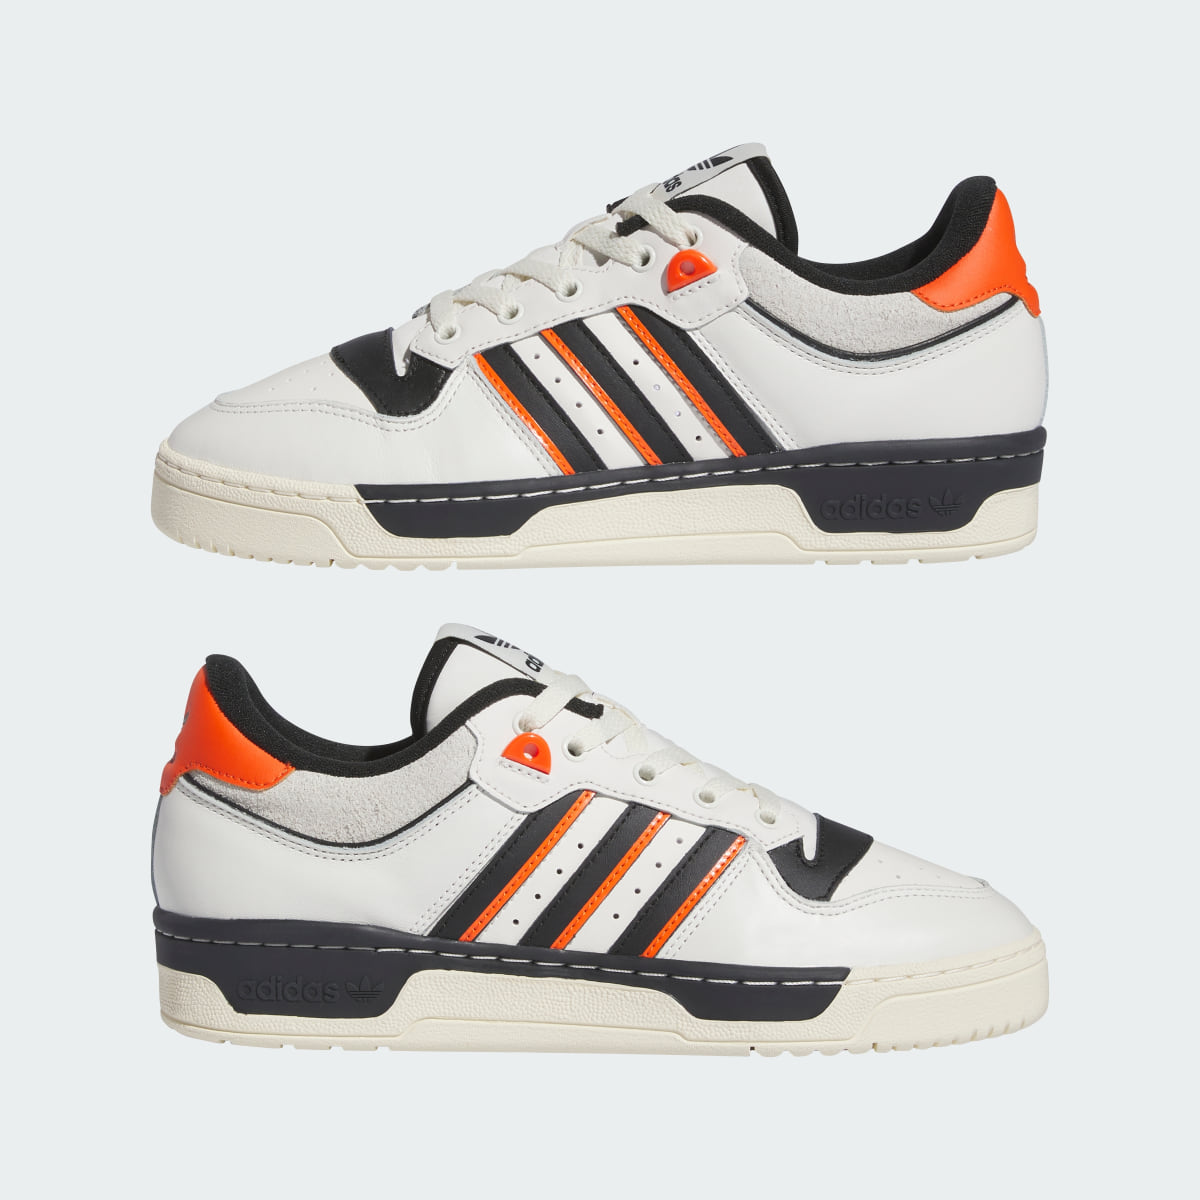 Adidas Rivalry 86 Low Shoes. 8